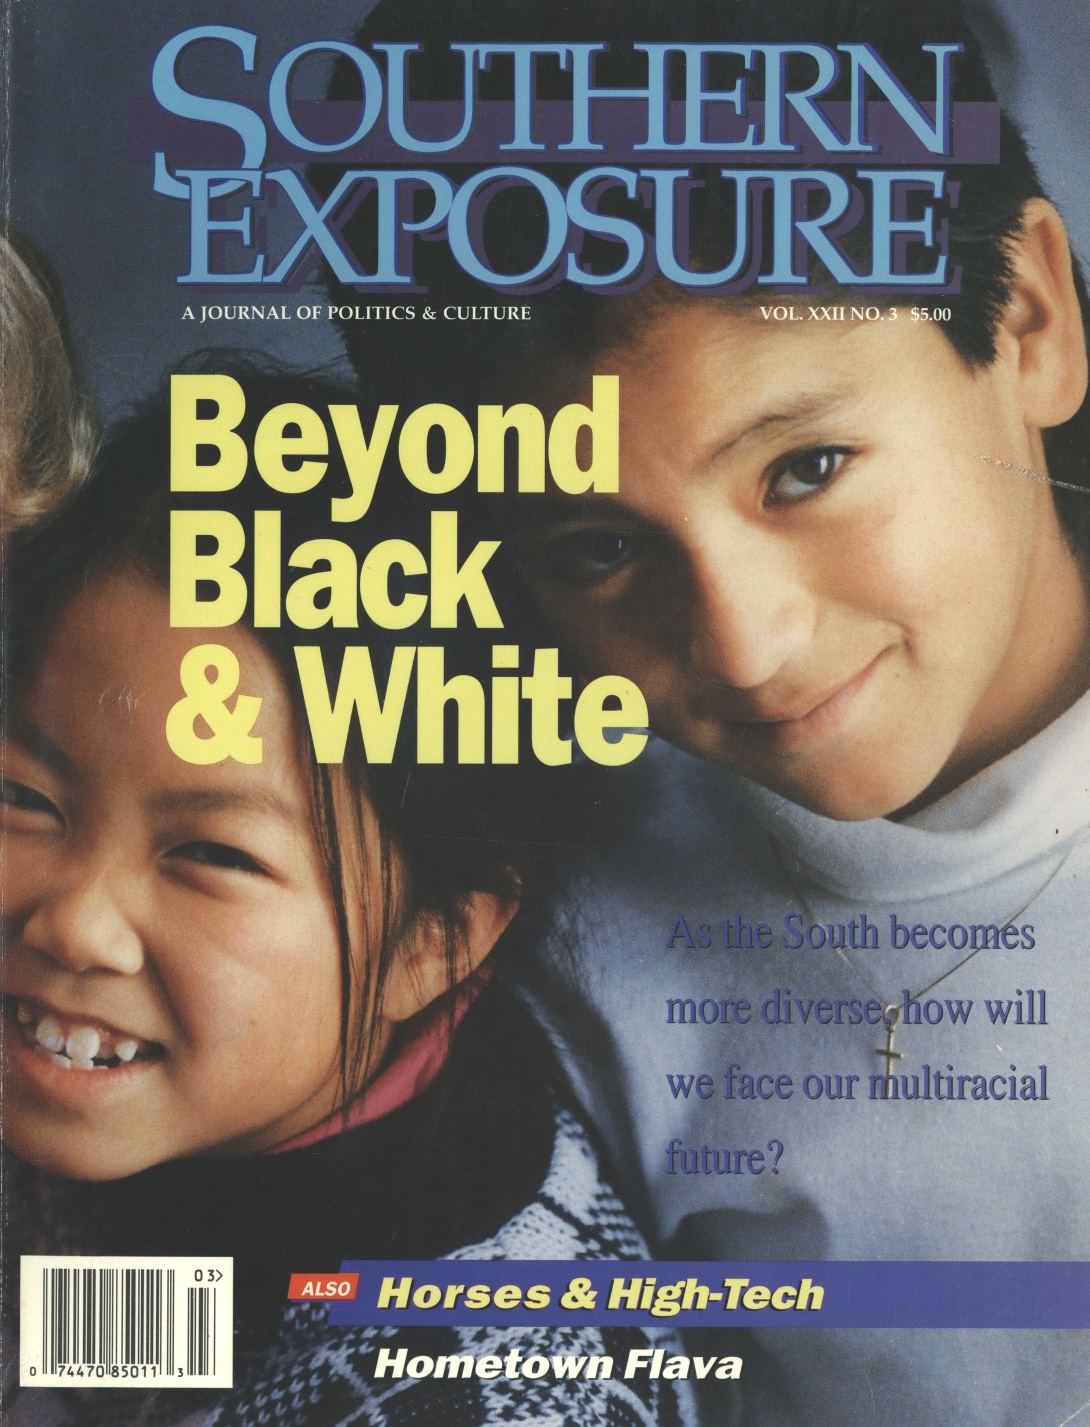 Magazine cover with photo of children reading "Beyond Black & White: As the South becomes more diverse, how will we face our multiracial future?"